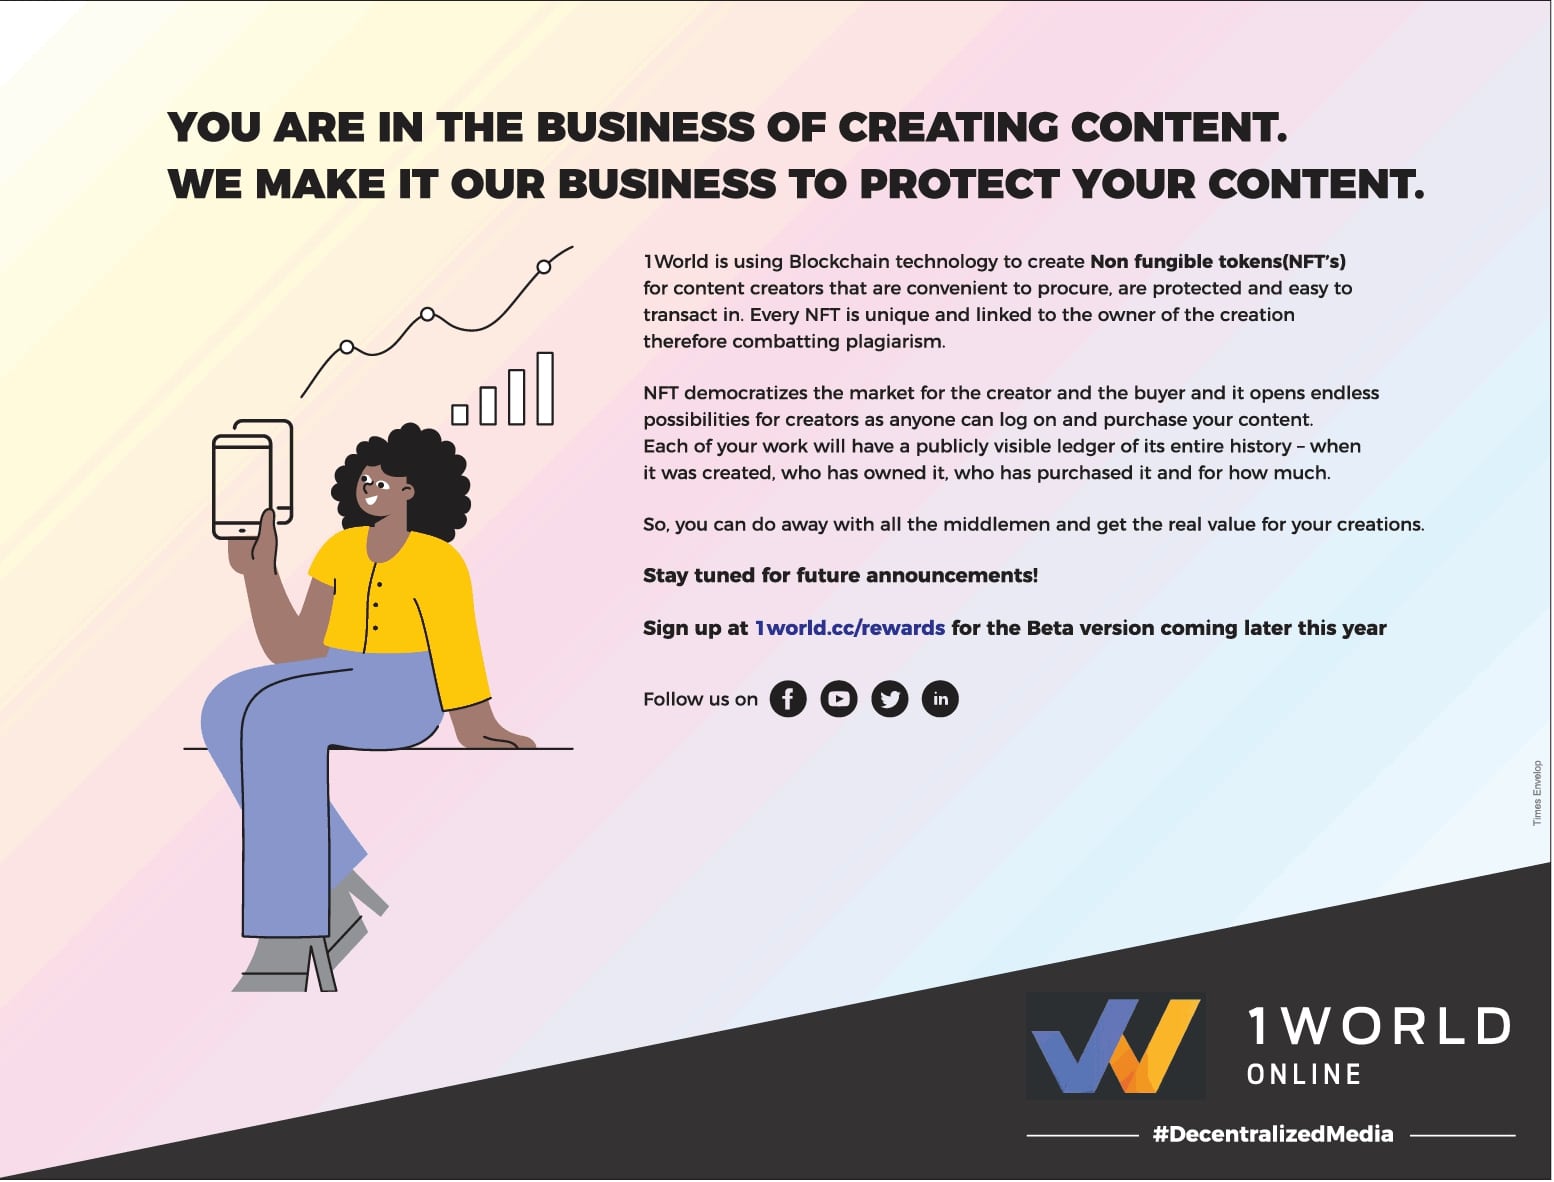 1-world-online-you-are-in-the-business-of-creating-content-ad-times-of-india-mumbai-20-05-2021